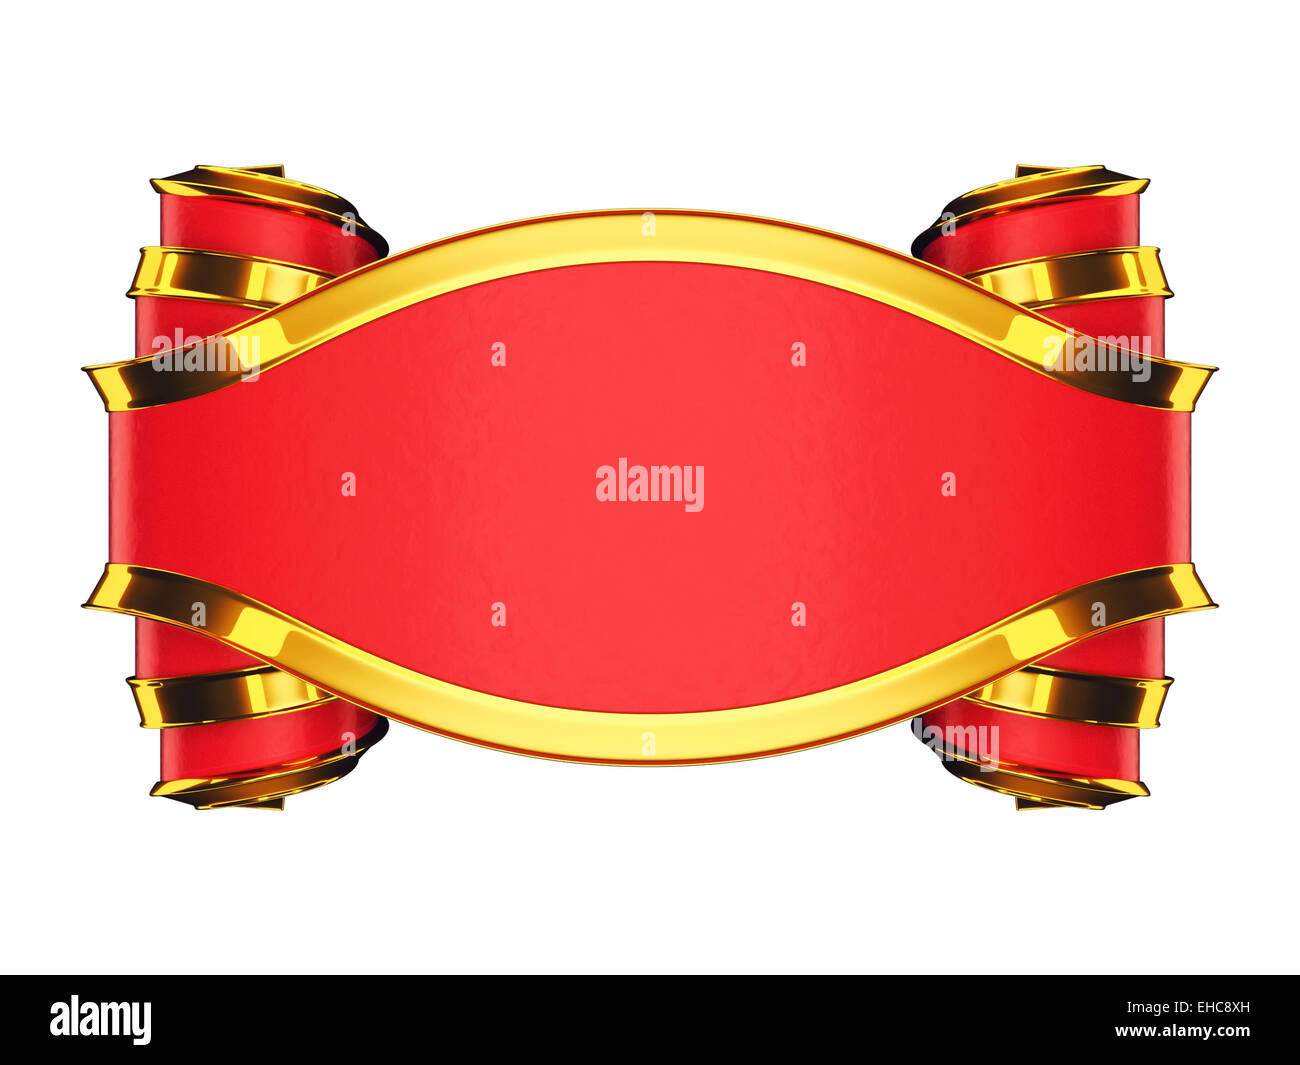 Massive red emblem with golden edging and curles. Over white Stock Photo